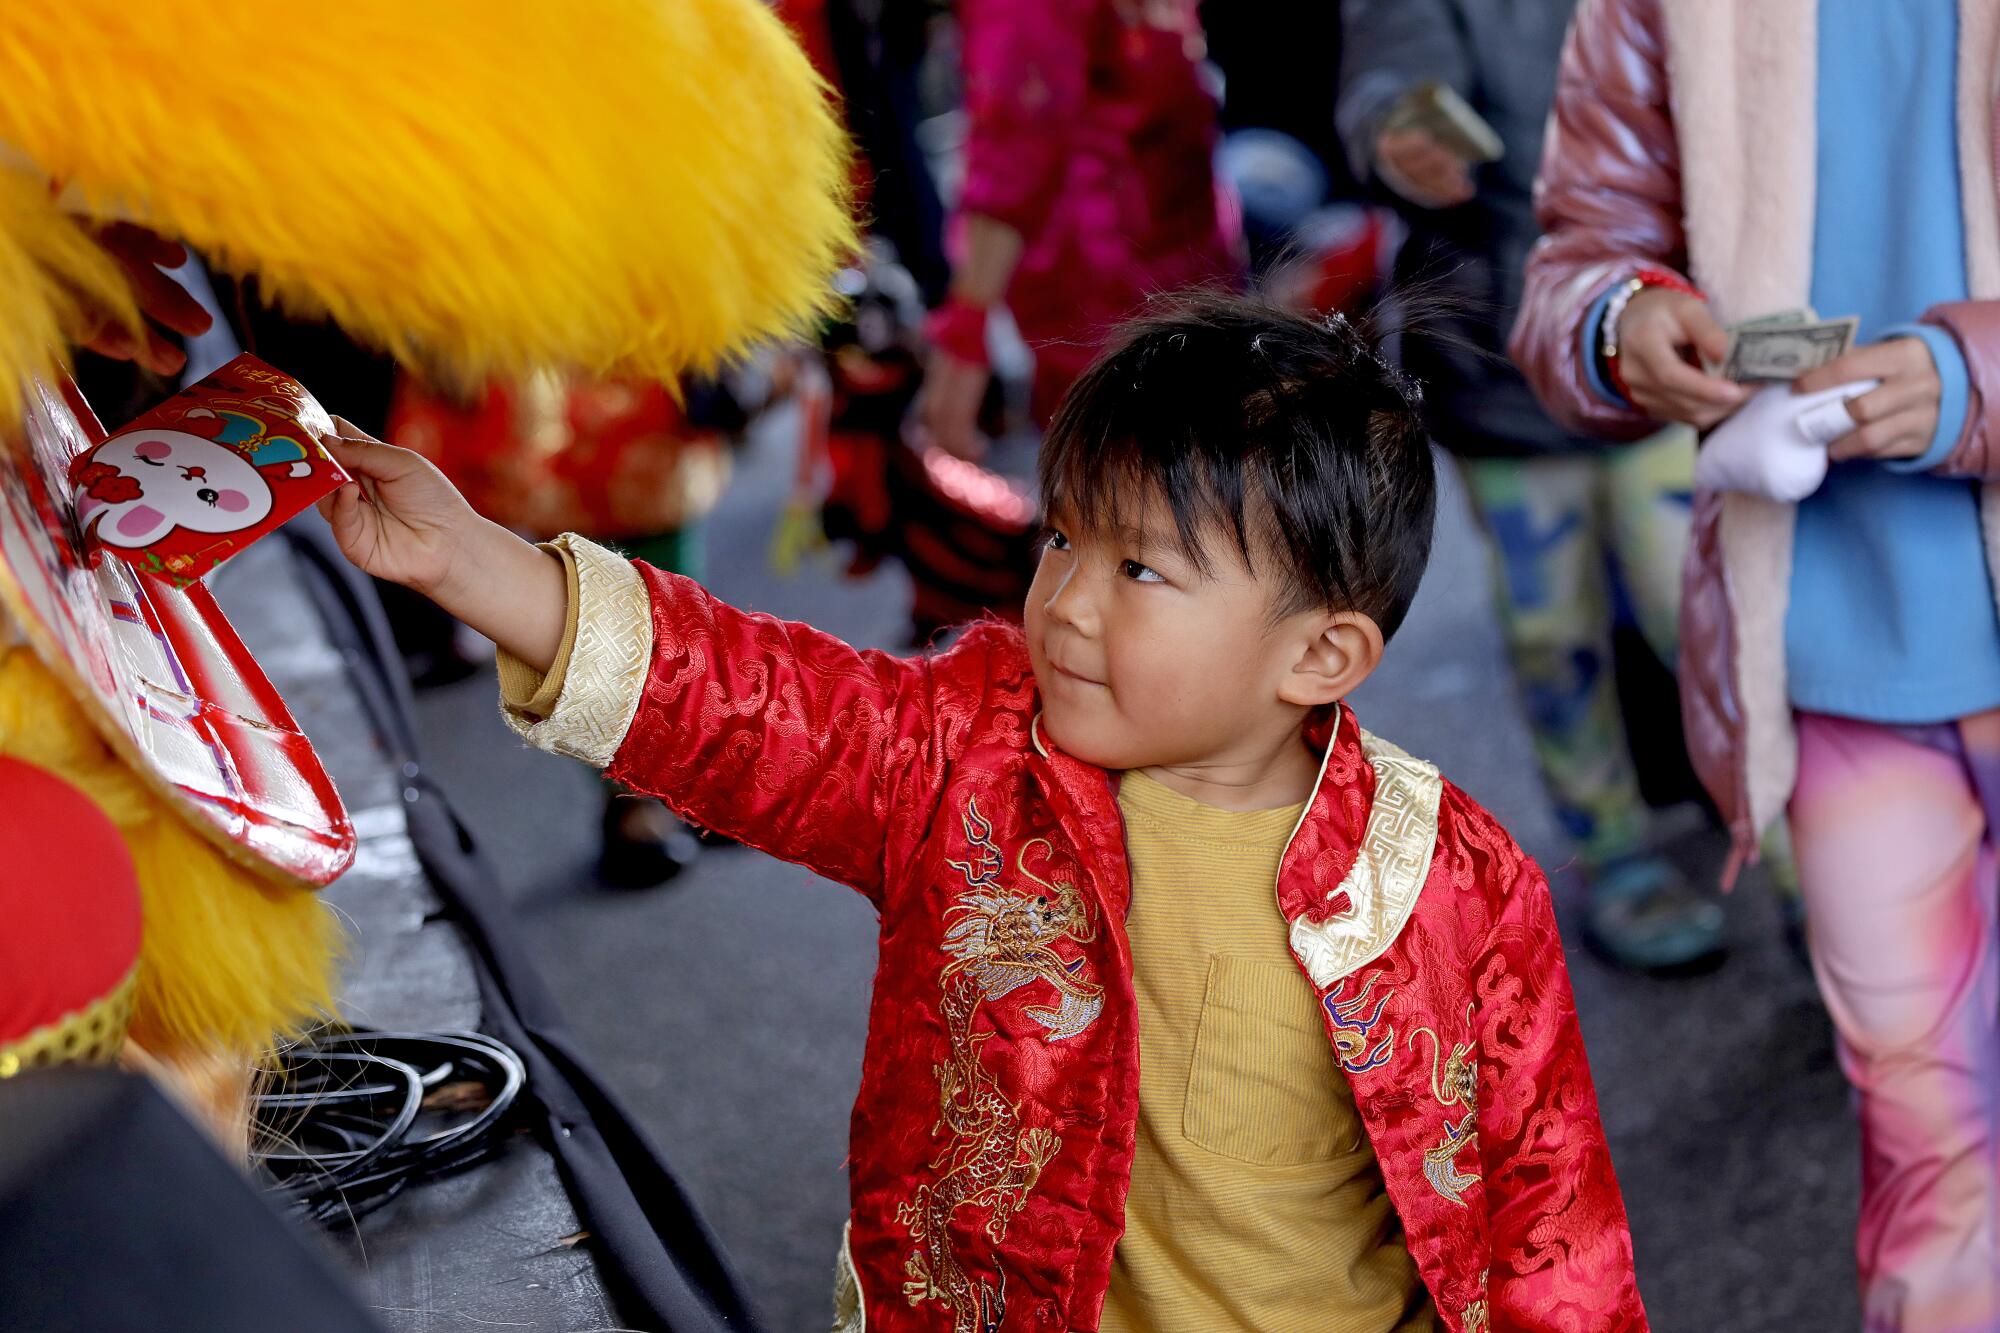 A young boy places a New Year's envelope into the mouth of a dancer at the Alhambra Lunar New Year Festival.